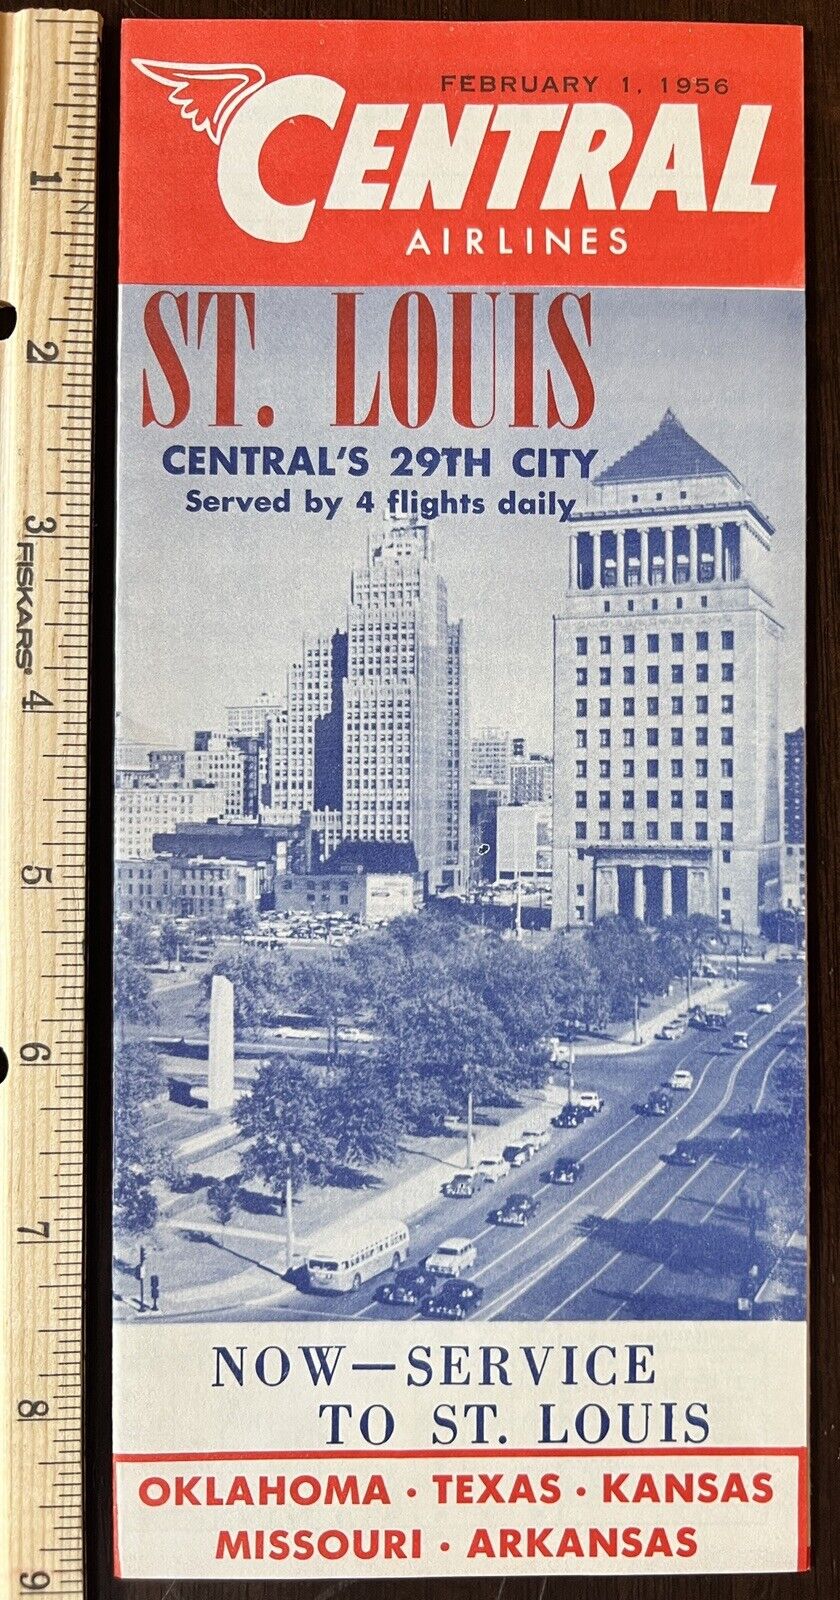 RARE 1956 FLY CENTRAL AIRLINES BROCHURE CENTRAL'S 29TH CITY ST. LOUIS